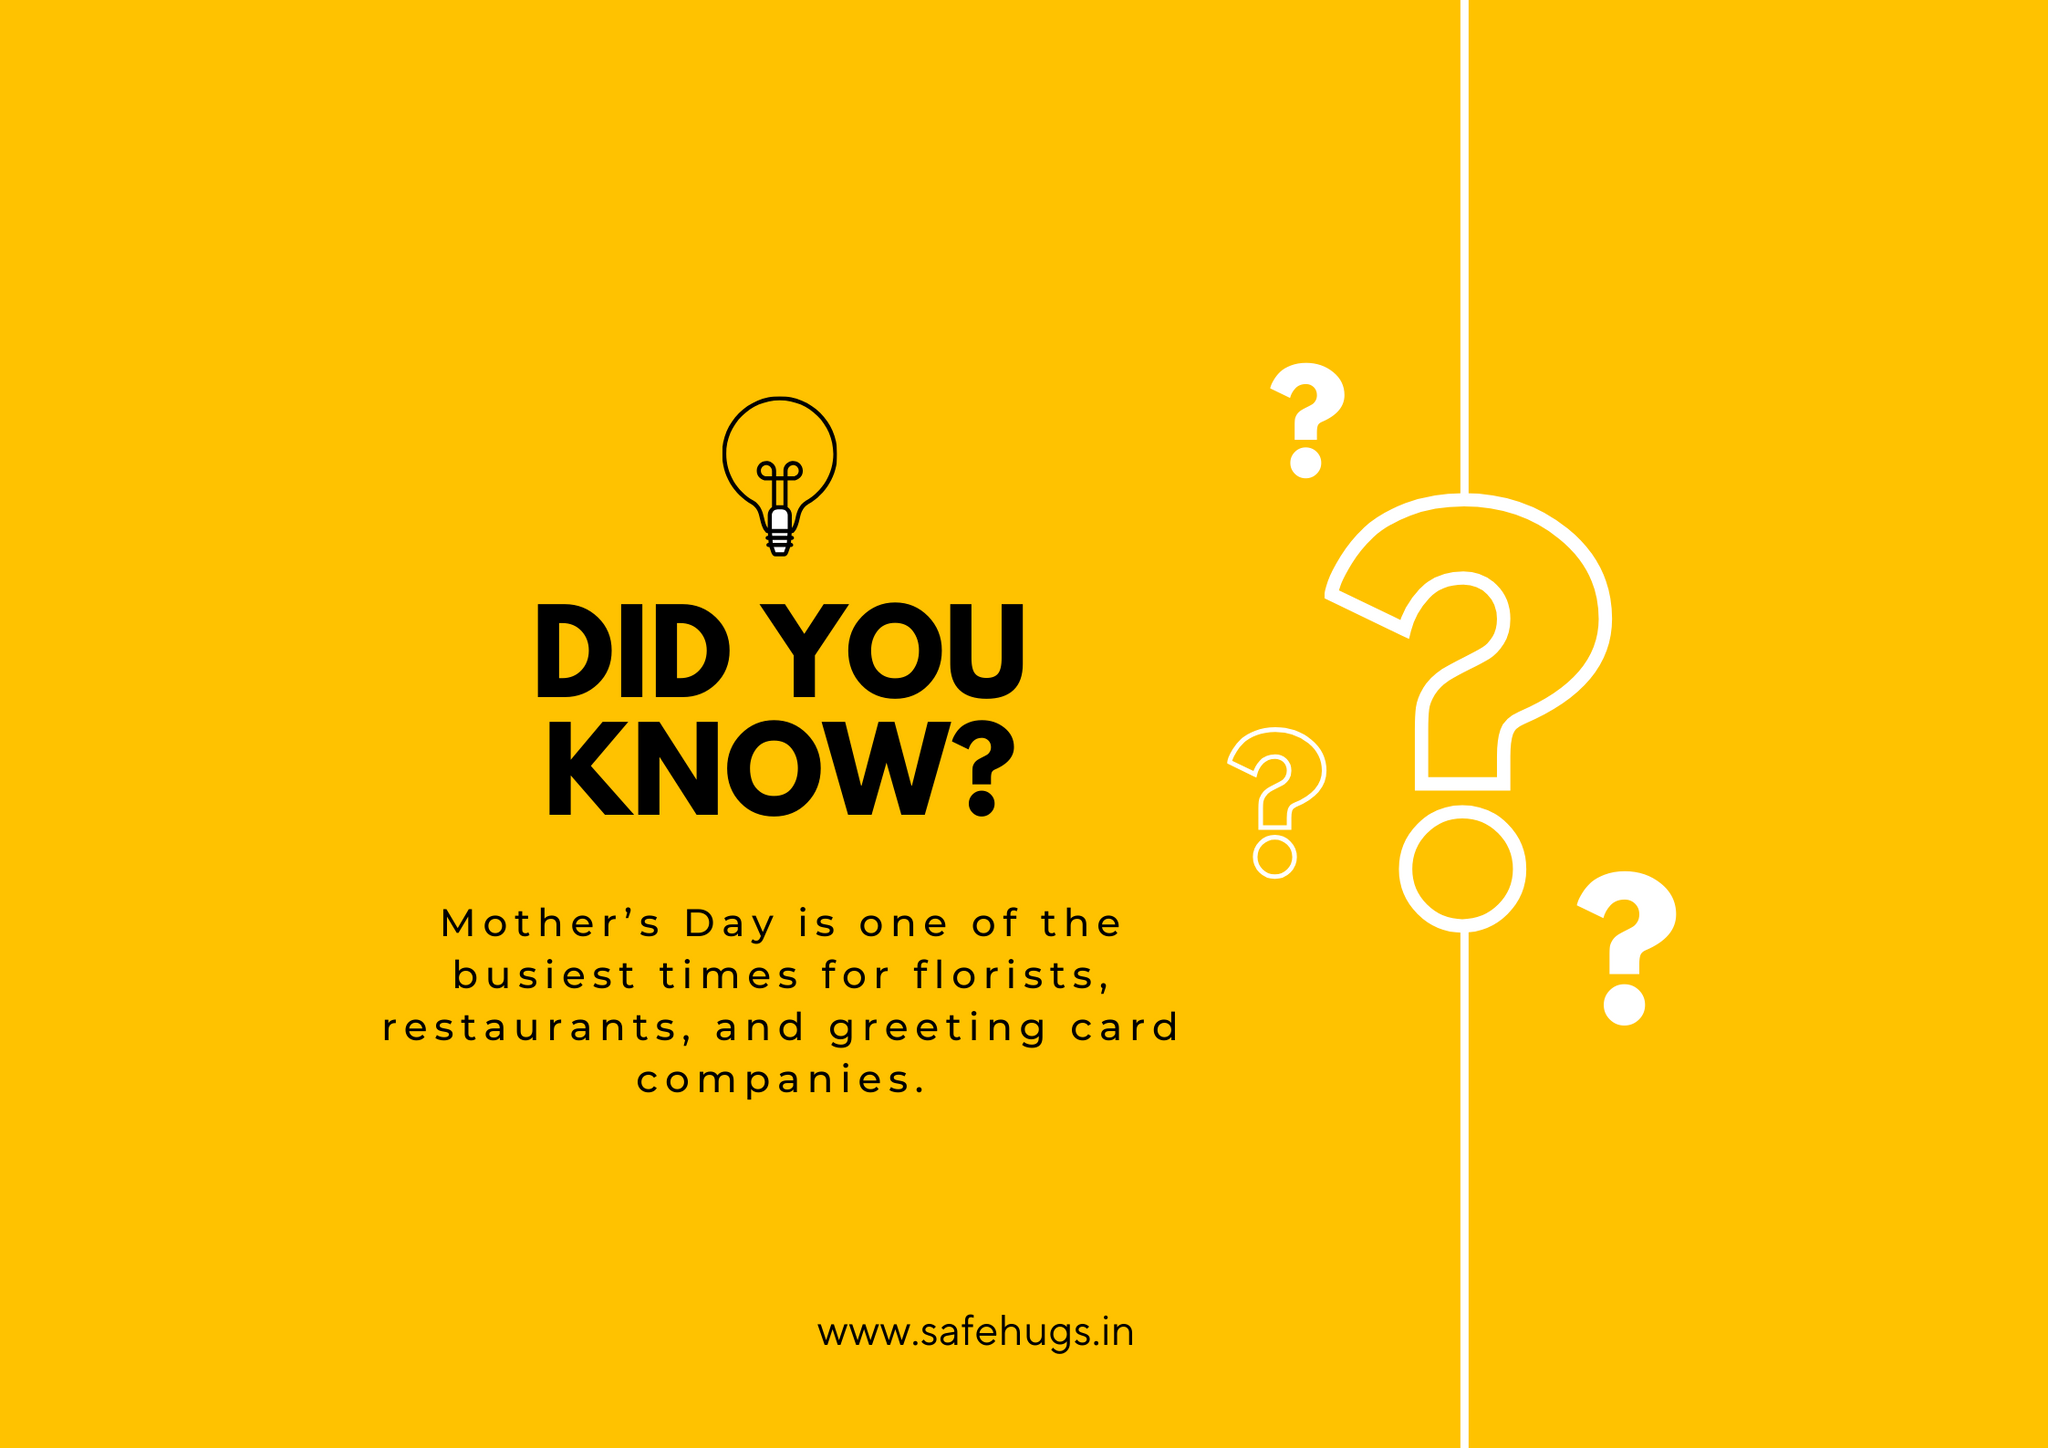 Did you know? Mothers day is one of the busiest days for florist.